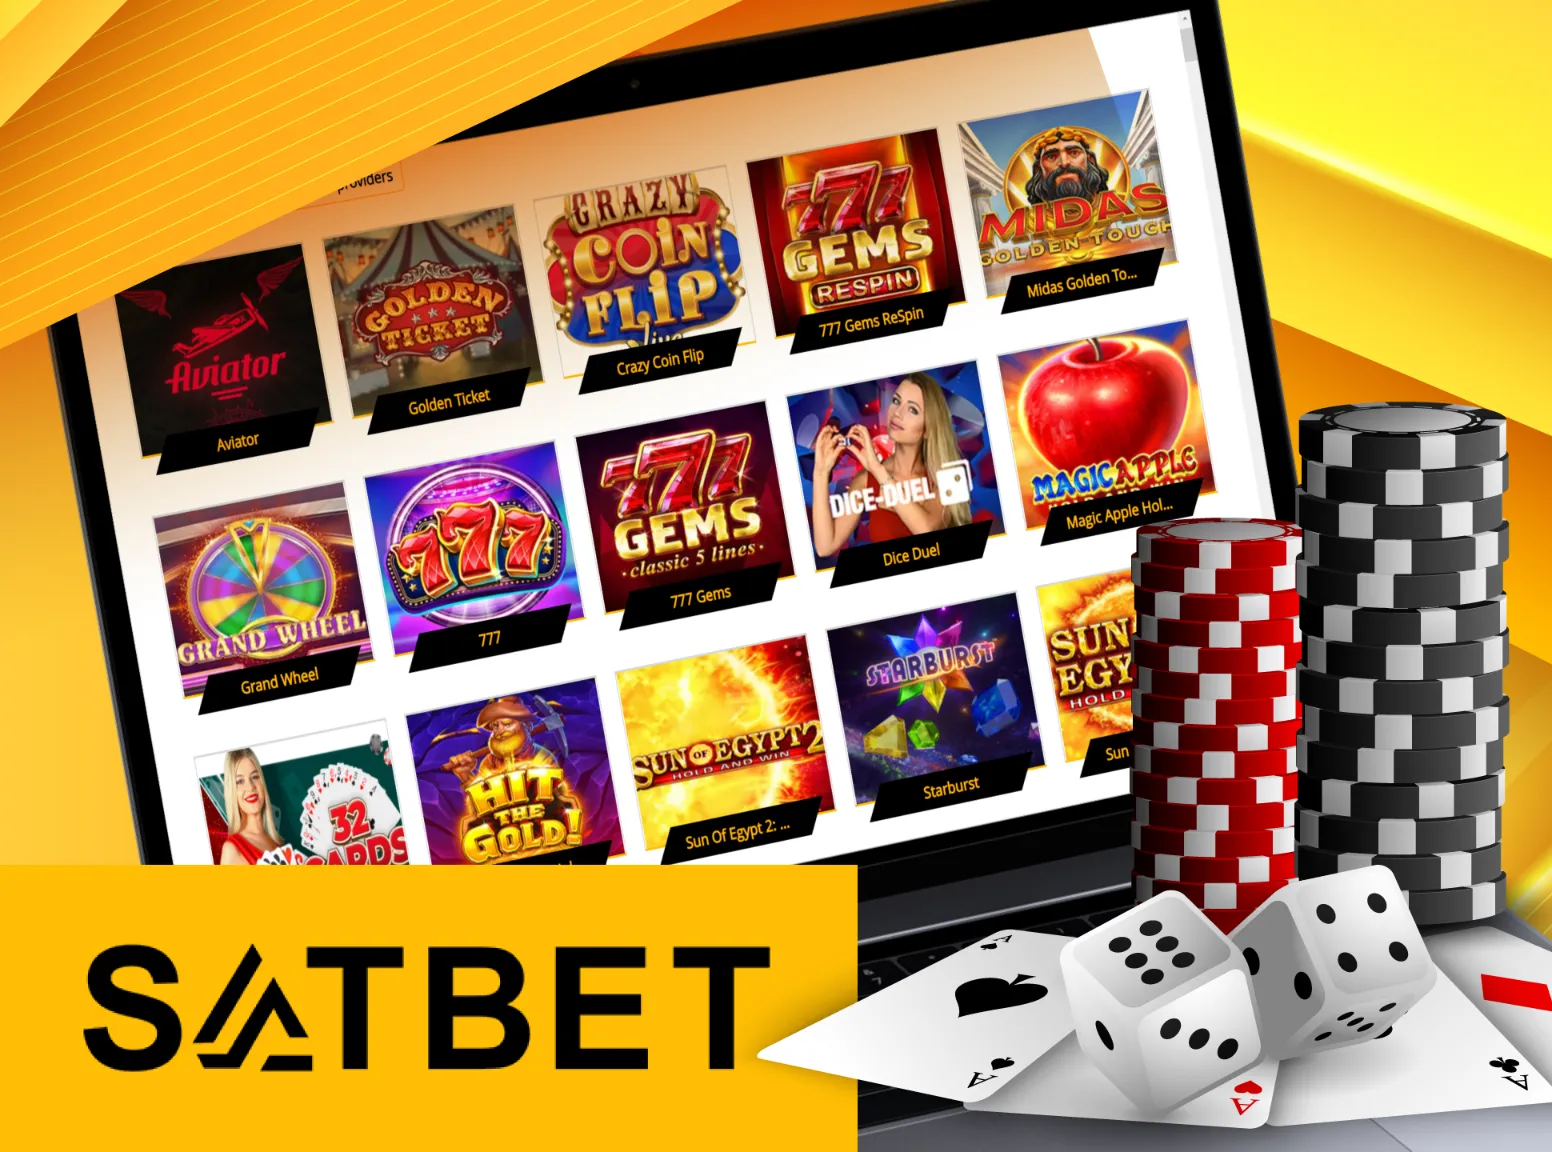 Play Satbet casino and have enjoyment.